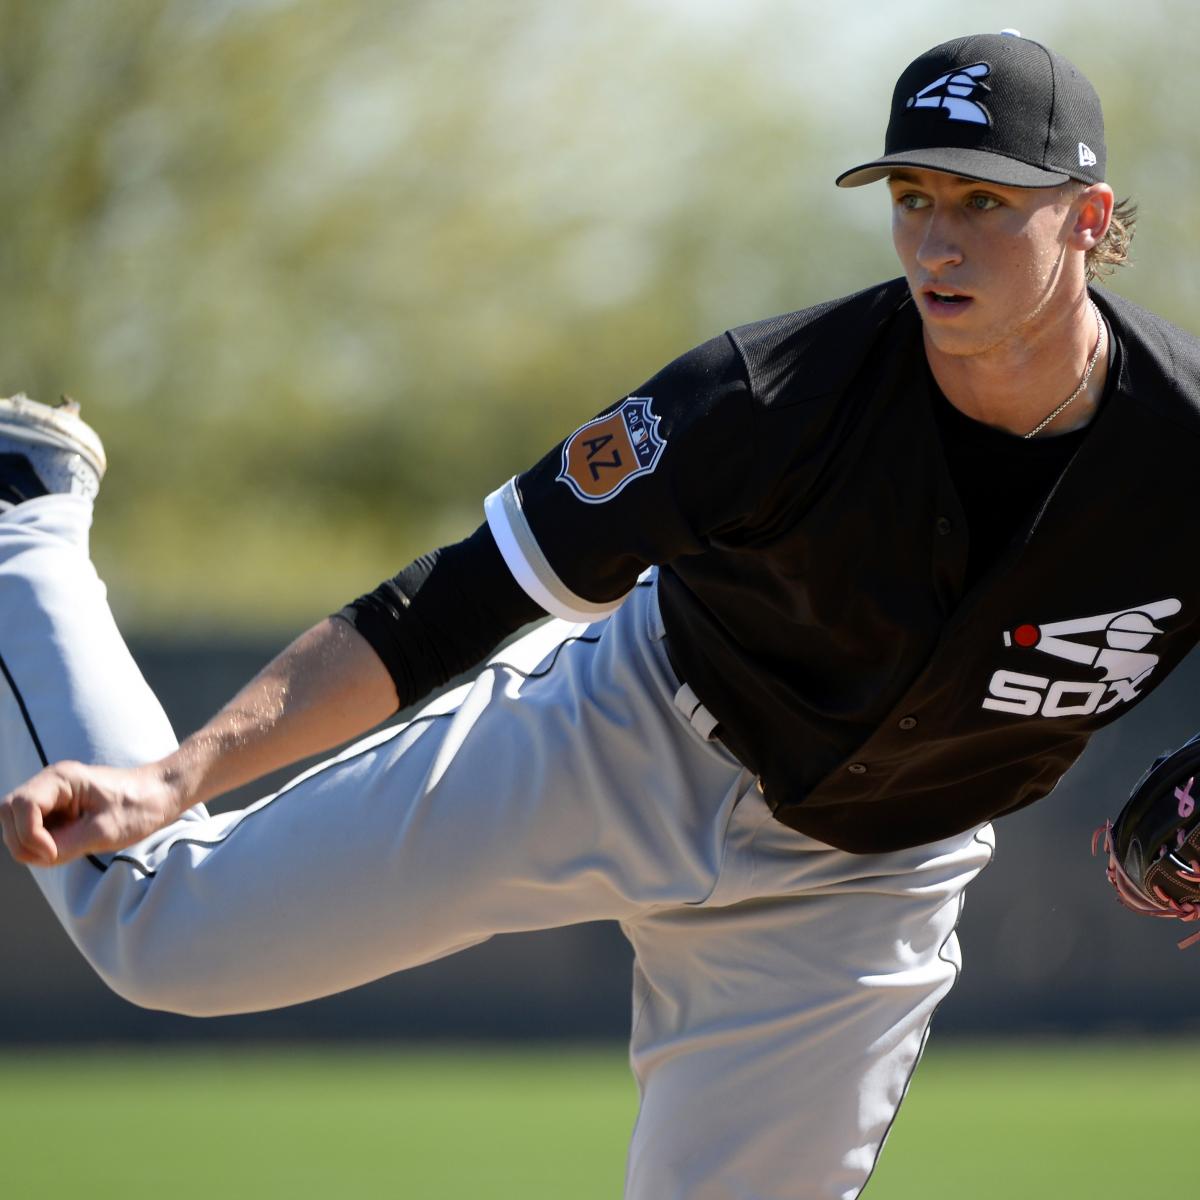 Michael Kopech yearns to realize potential, get White Sox back to